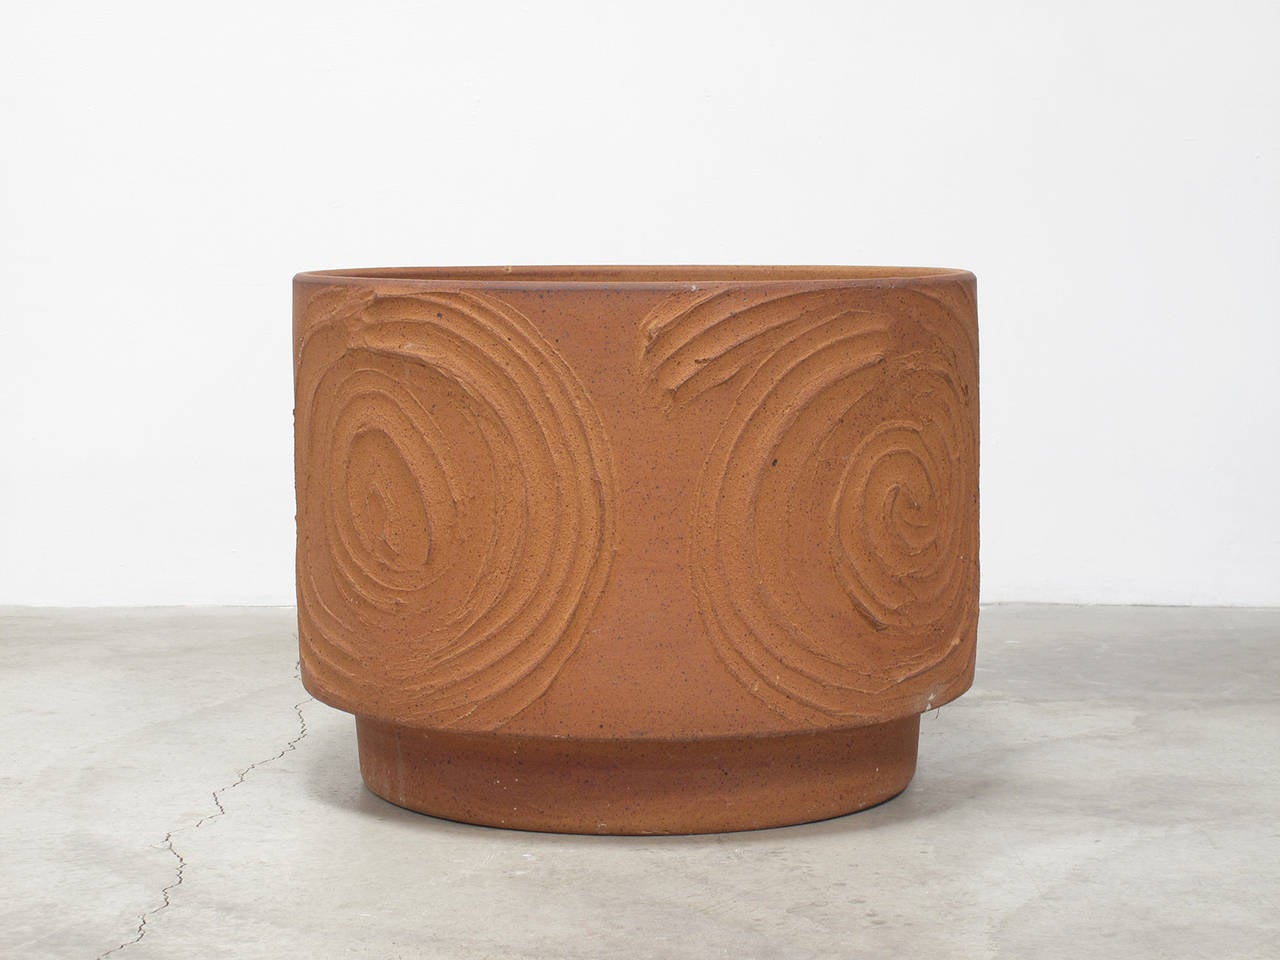 David Cressey
'Expressive' design, 1960s
Stoneware, unglazed
Pro Artisan Collection
Architectural pottery
Los Angeles, California
16.75 high x 22.75 diameter
One original drainage hole in center of bottom.